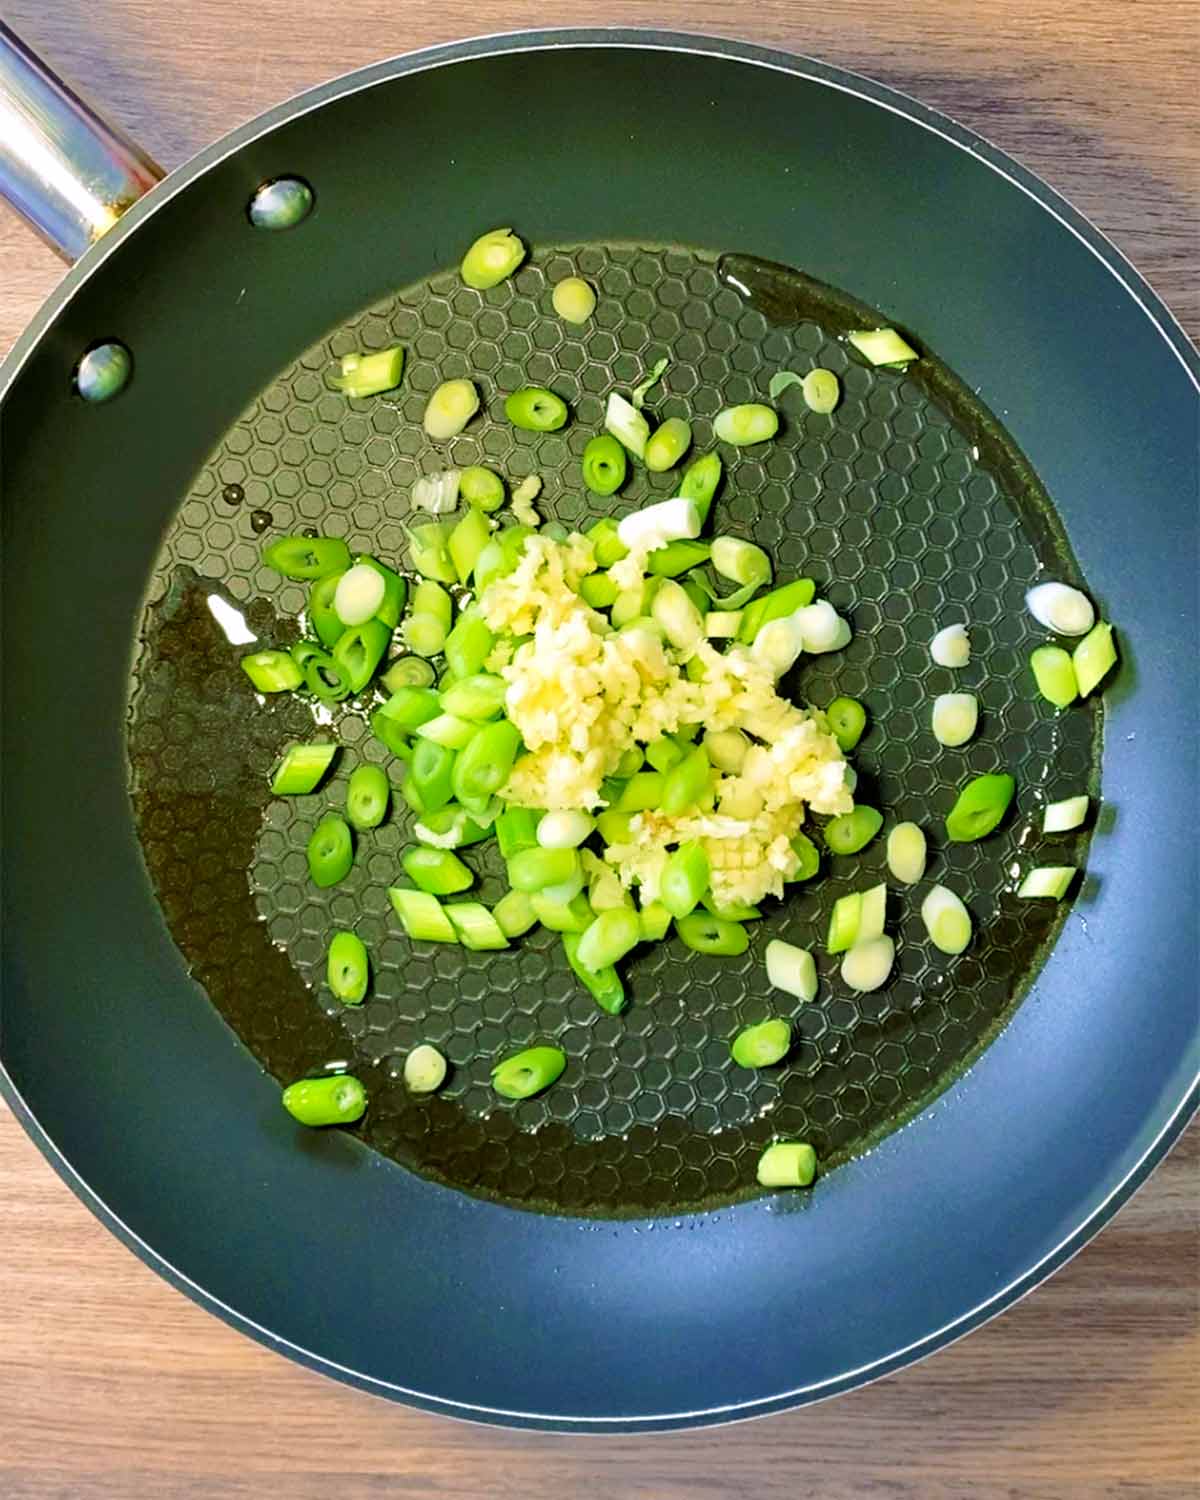 A frying pan with shopped spring onions and minced garlic cooking in it.